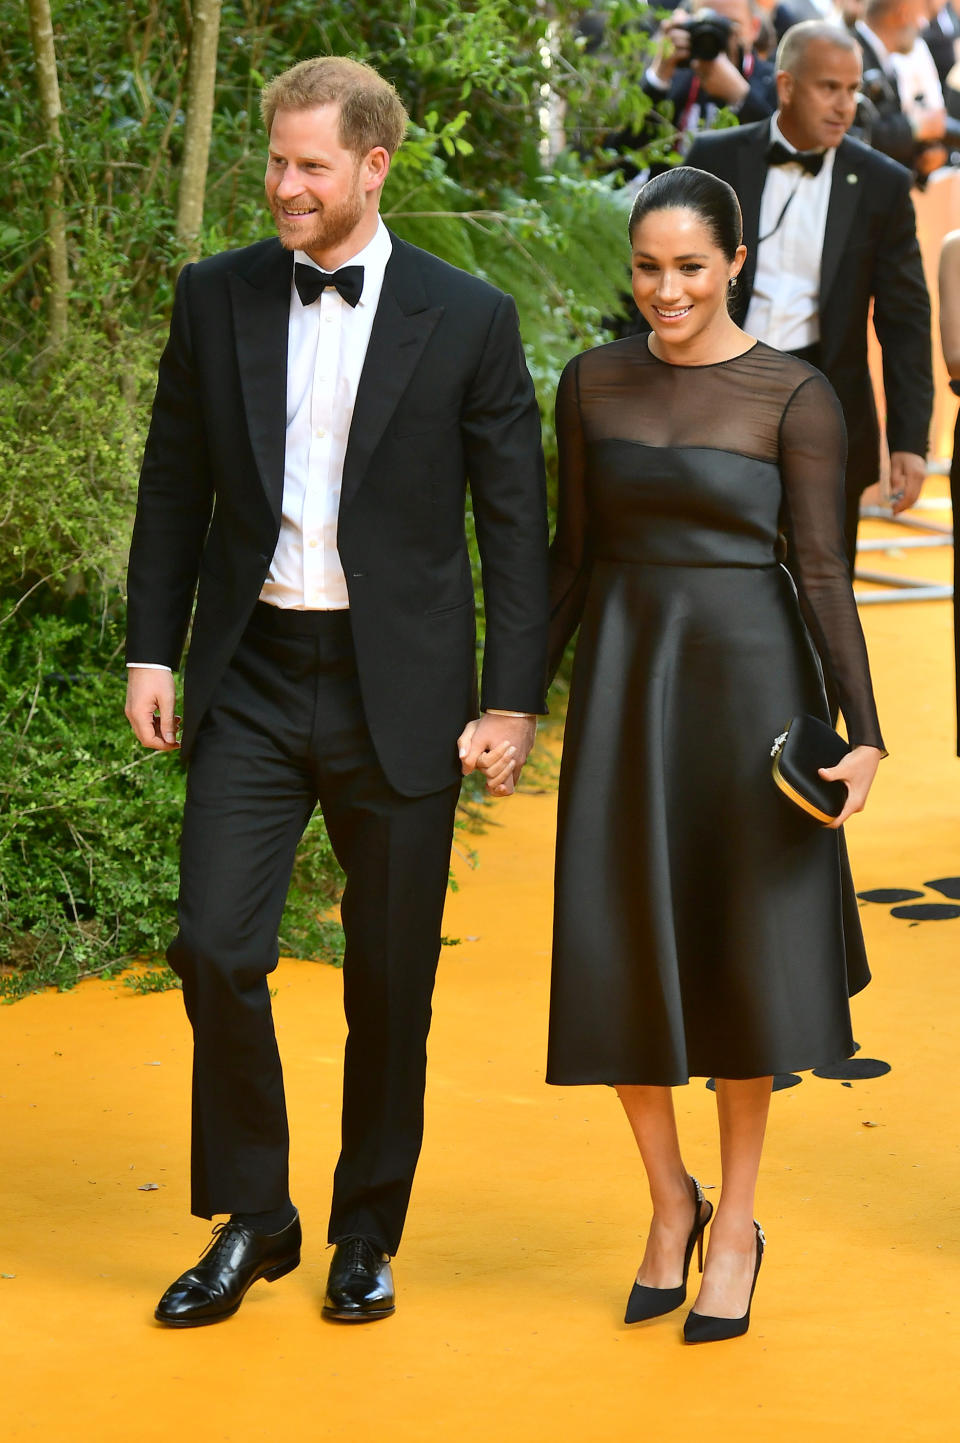 For her first post-pregnancy red carpet appearance, the Duchess of Sussex reminded us why she's the nation's go-to style muse in a £3,454 black satin dress with sheer sleeves by Jason Wu. A £1,680 Gucci clutch and matching shoes completed the winning ensemble. <em>[Photo: Getty]</em>